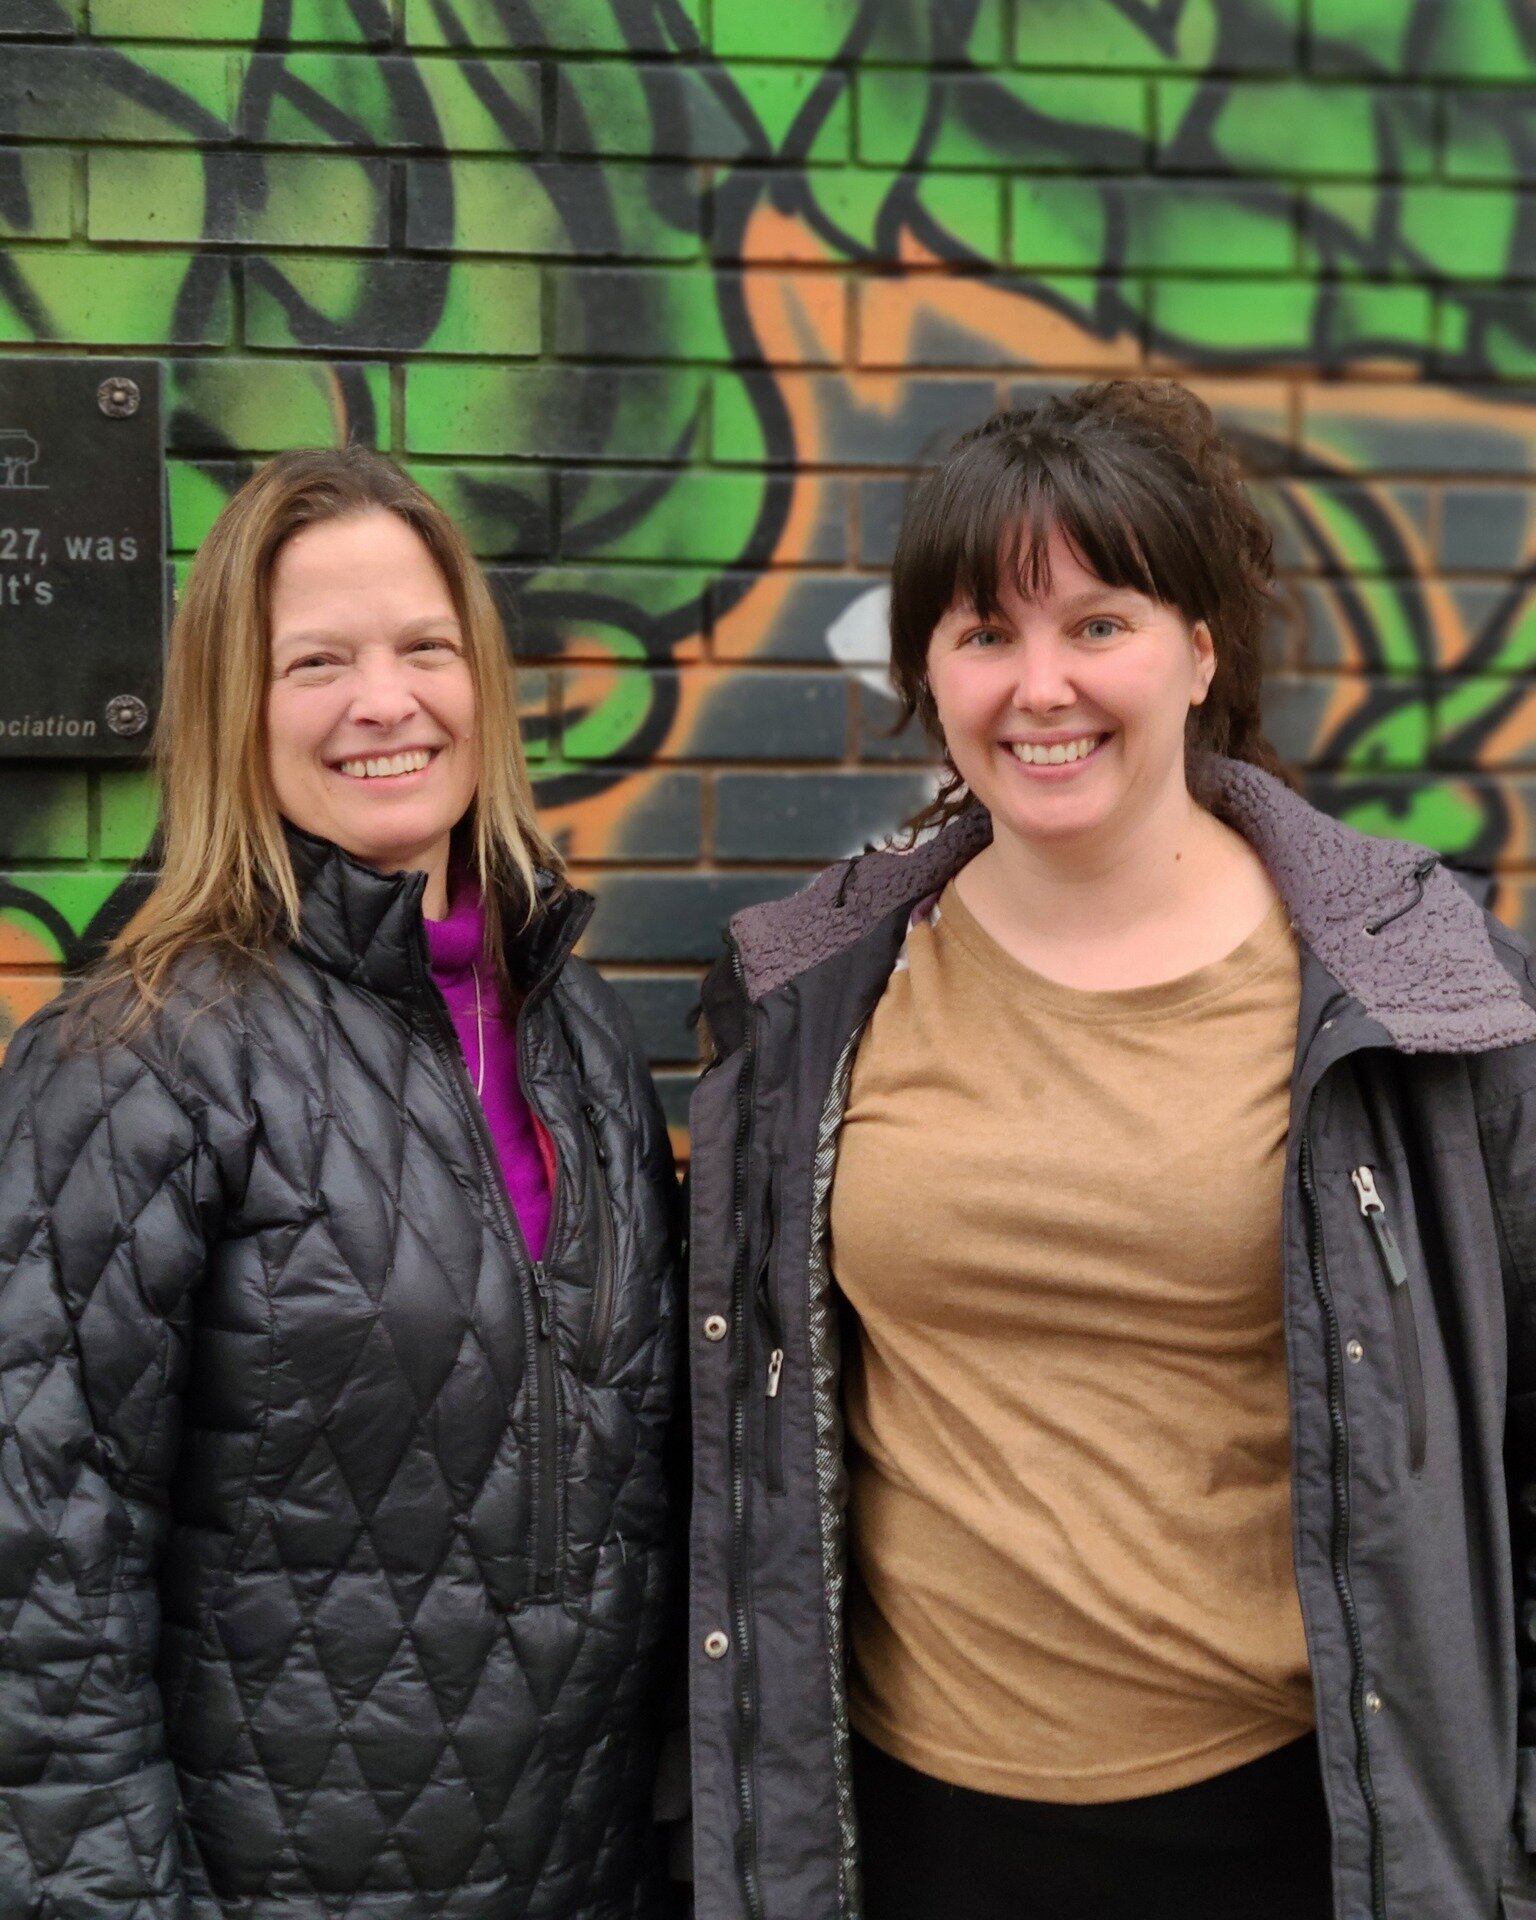 We held our third Green Drinks of the season last week! The conversation was thoughtful and a call to action for those of us living in rural areas. 

Special thanks to our guest speakers Dr. Kelly Vodden and Lauralee Ledrew, who discussed climate res